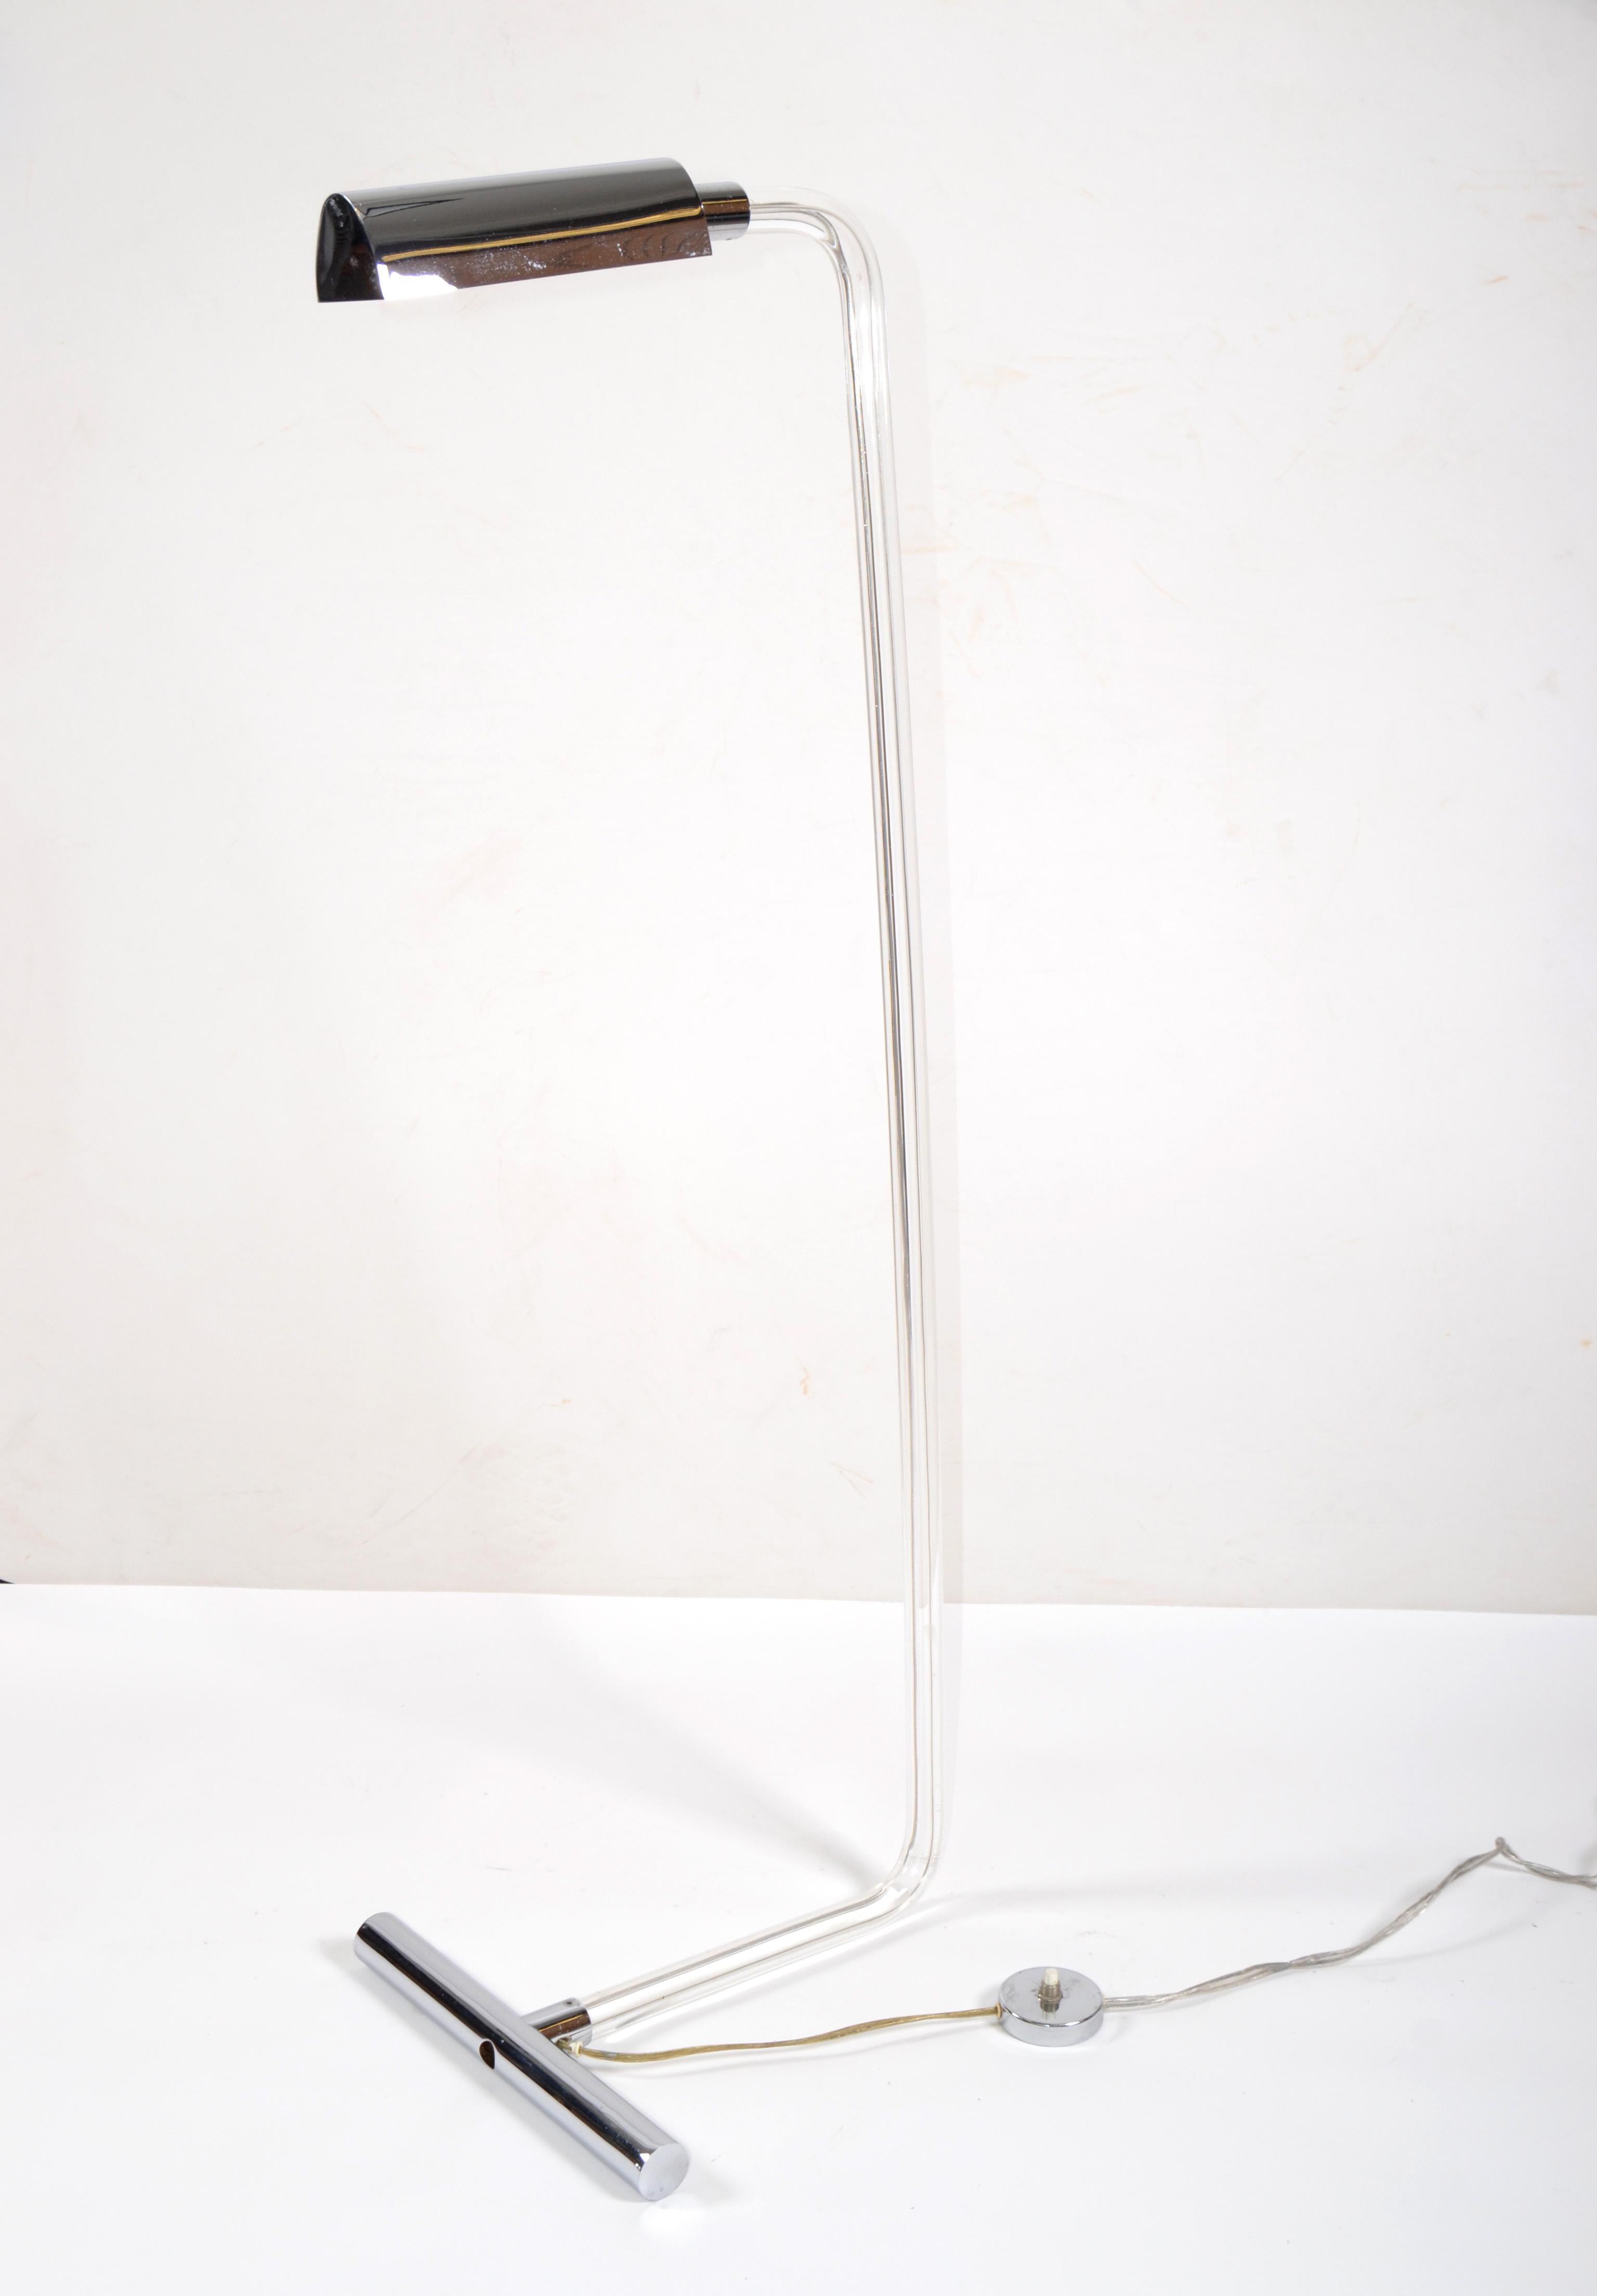 Elegant Lucite and chrome floor lamp from the 1970s designed by Peter Hamburger and made by George Kovacs Lighting.
Uses a Halogen bulb with max. 40 watts.
Comes with a footswitch and is in perfect working condition.